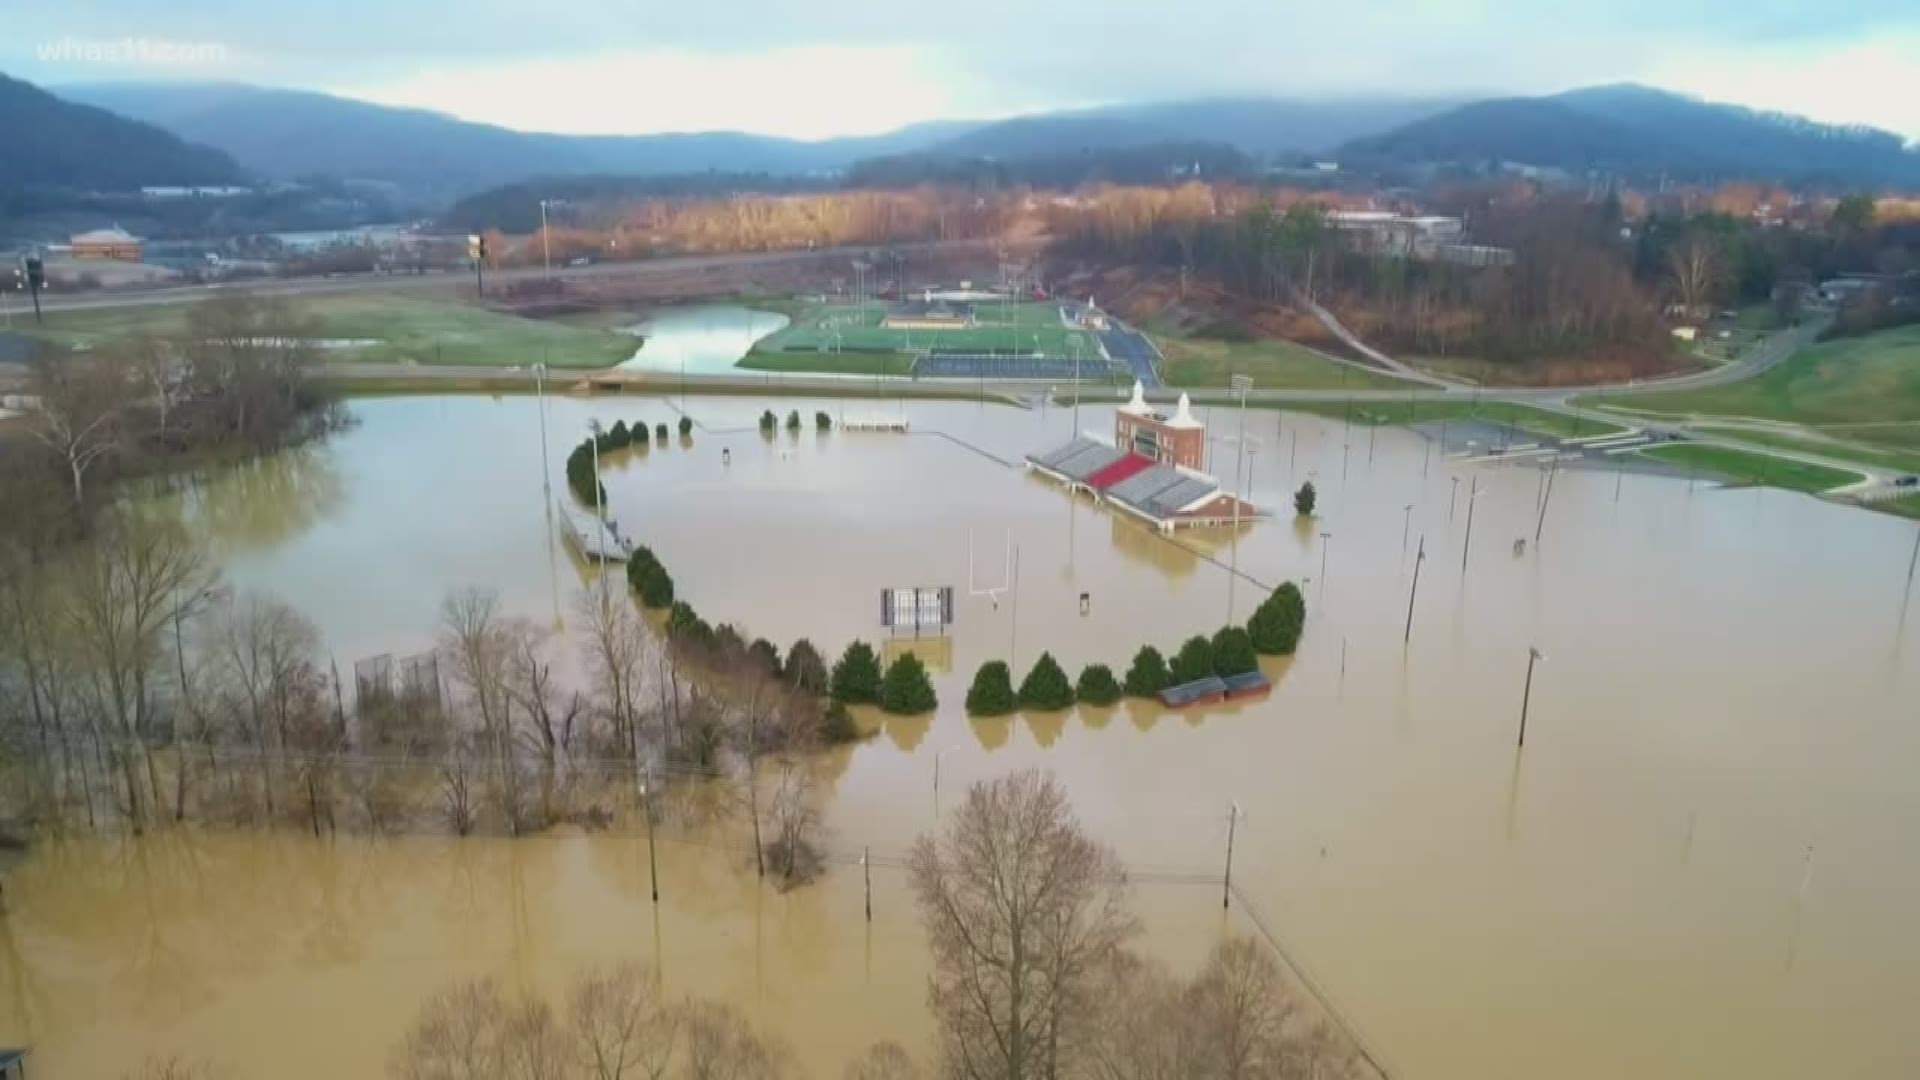 Governor Andy Beshear declared a state of emergency last week in response to severe flooding in southeastern Kentucky.